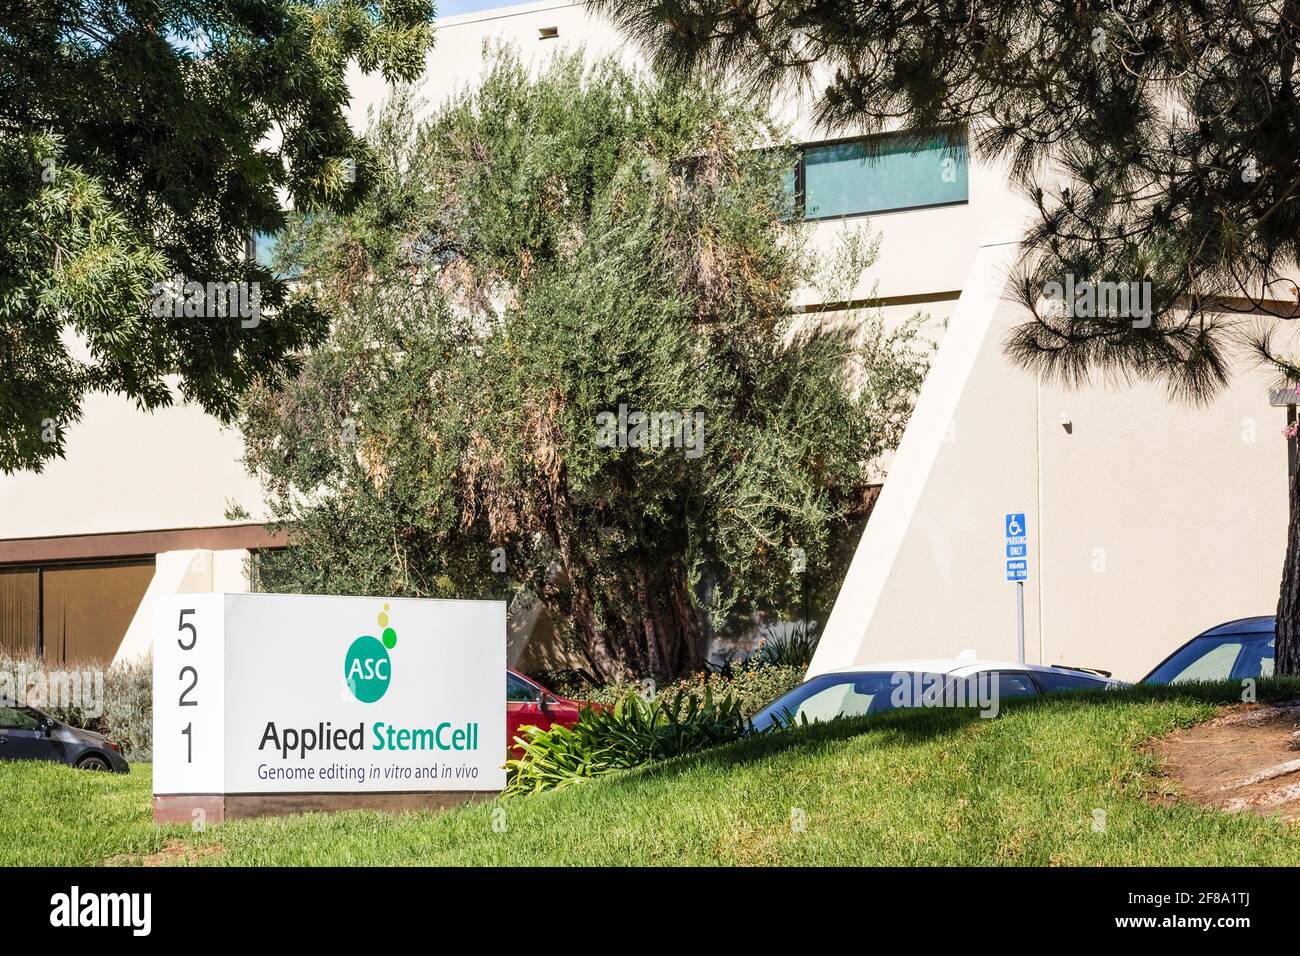 Sep 24, 2020 Milpitas / CA / USA - Applied StemCell headquarters in Silicon Valley; Applied StemCell Inc is a biotechnology company providing animal a Stock Photo